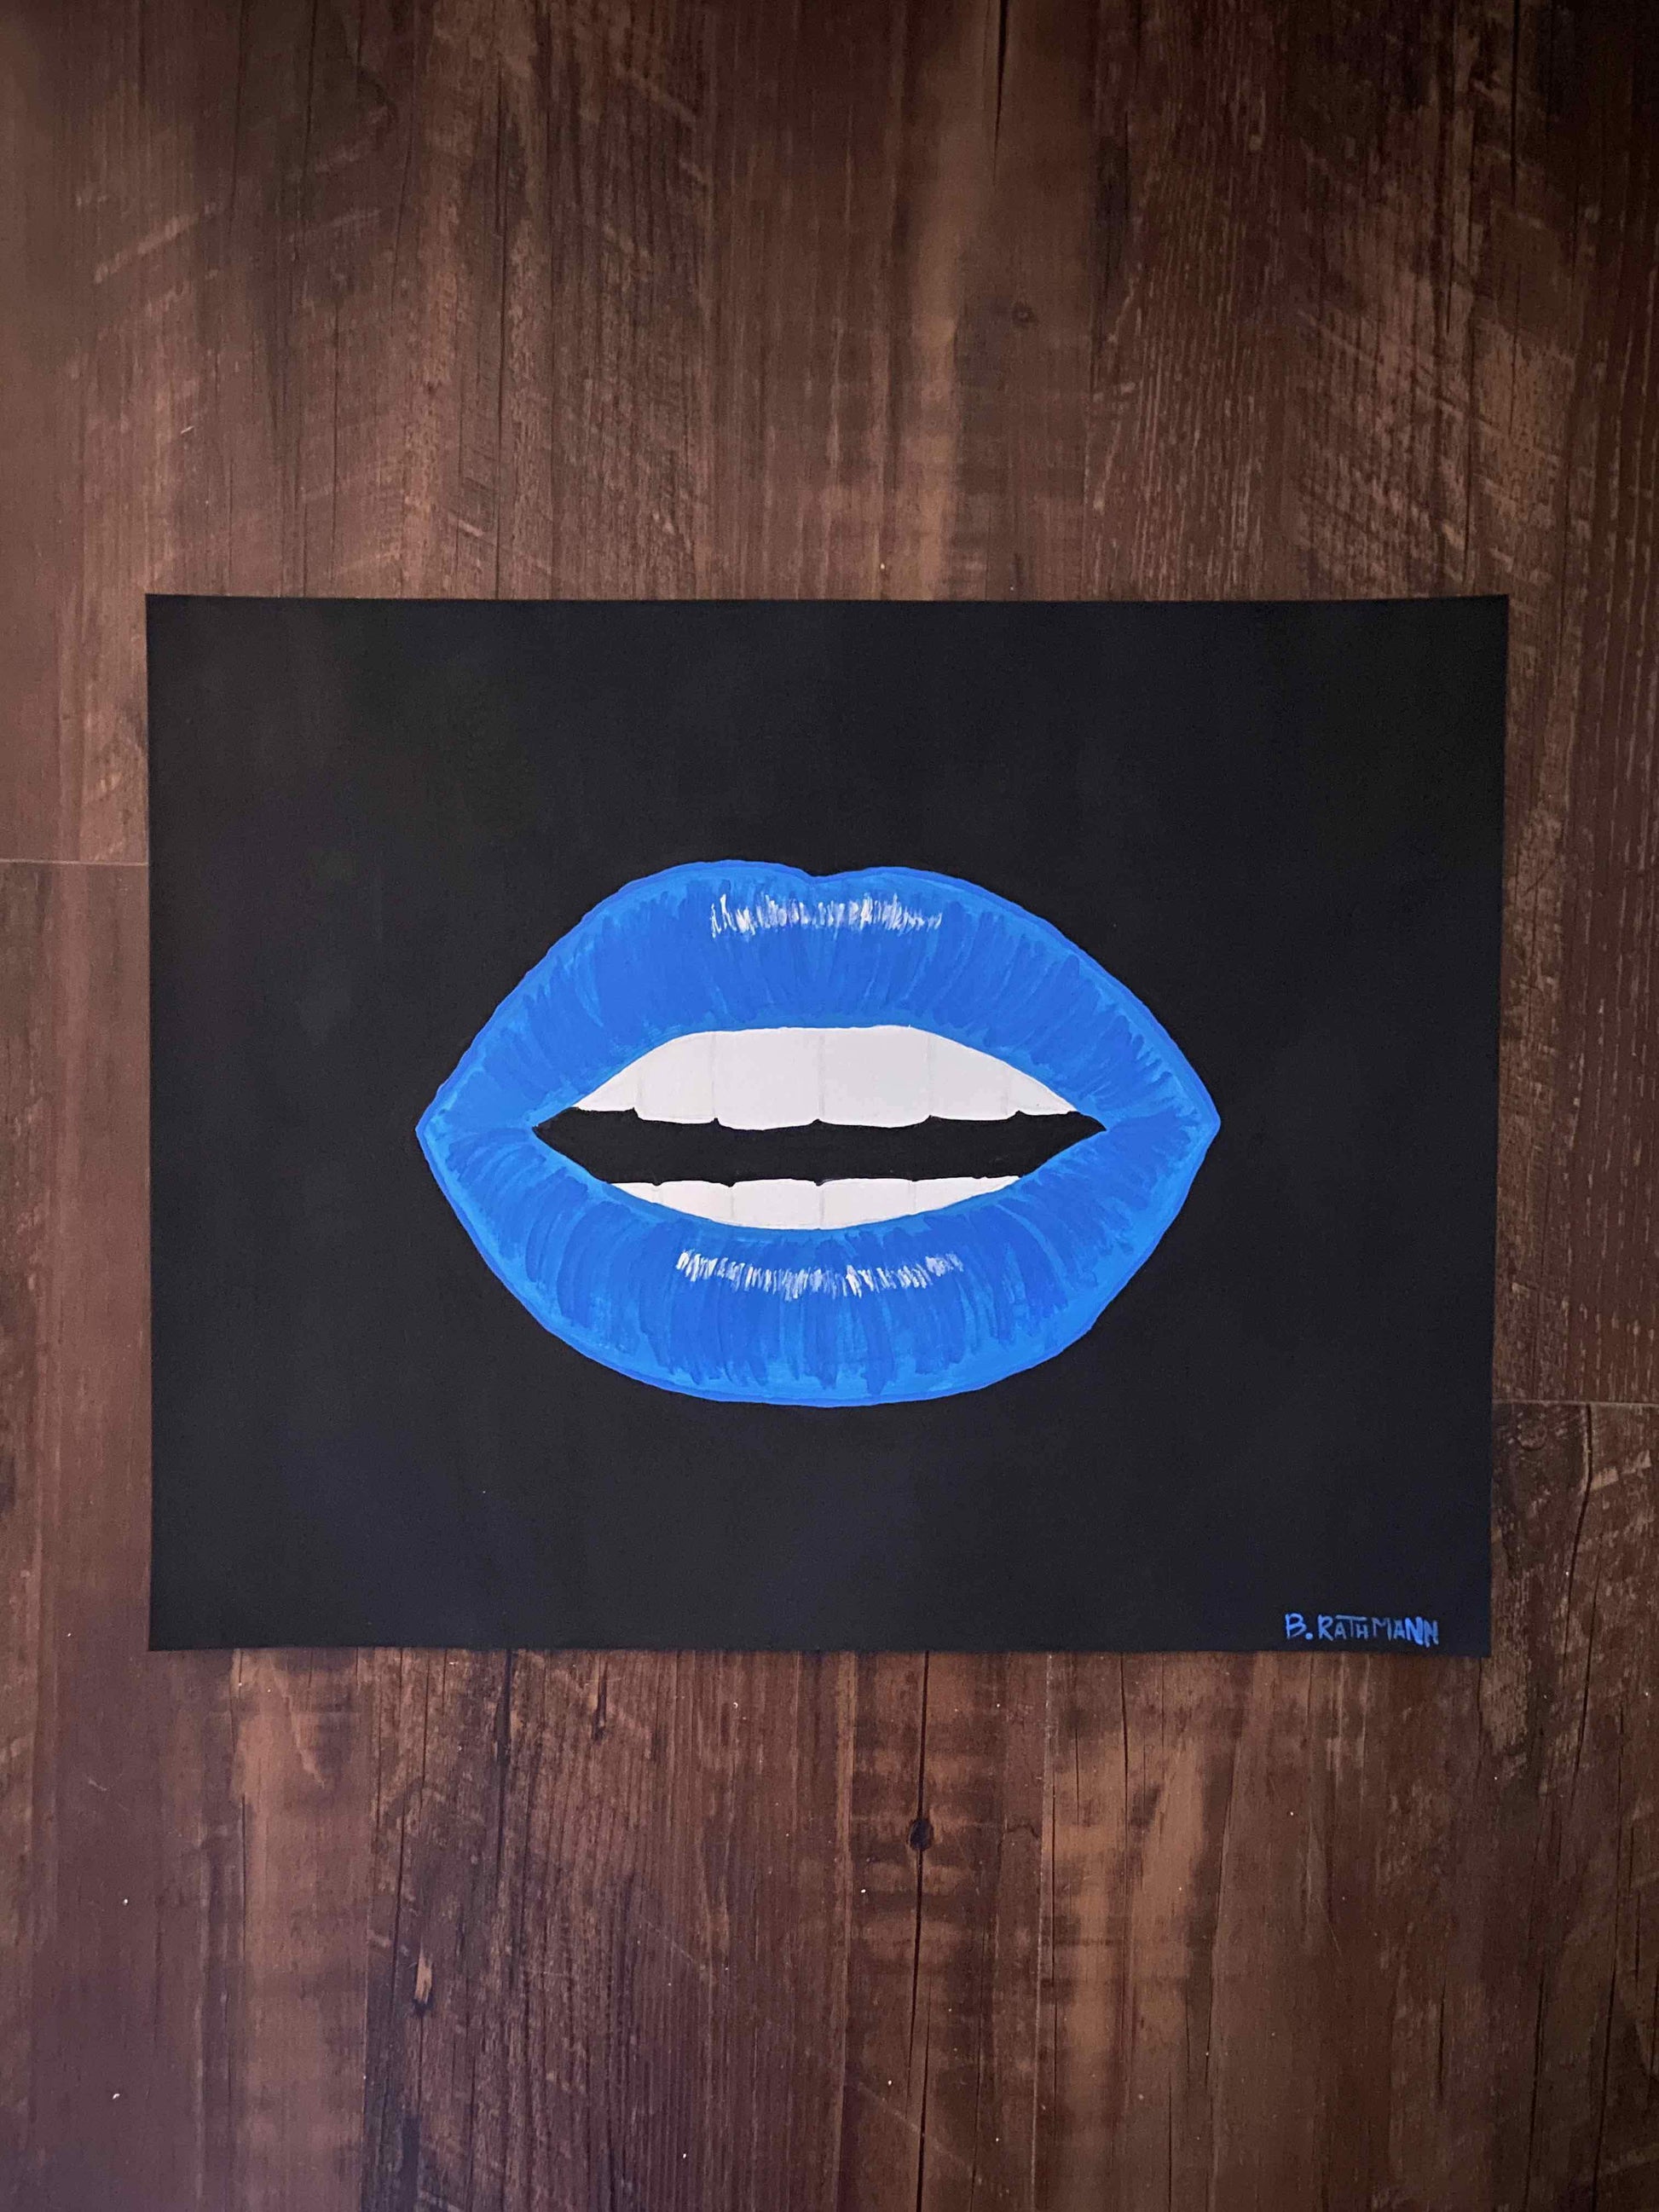 This is an original acrylic painting on heavy paper. The bright blue lips are centered on a black background.